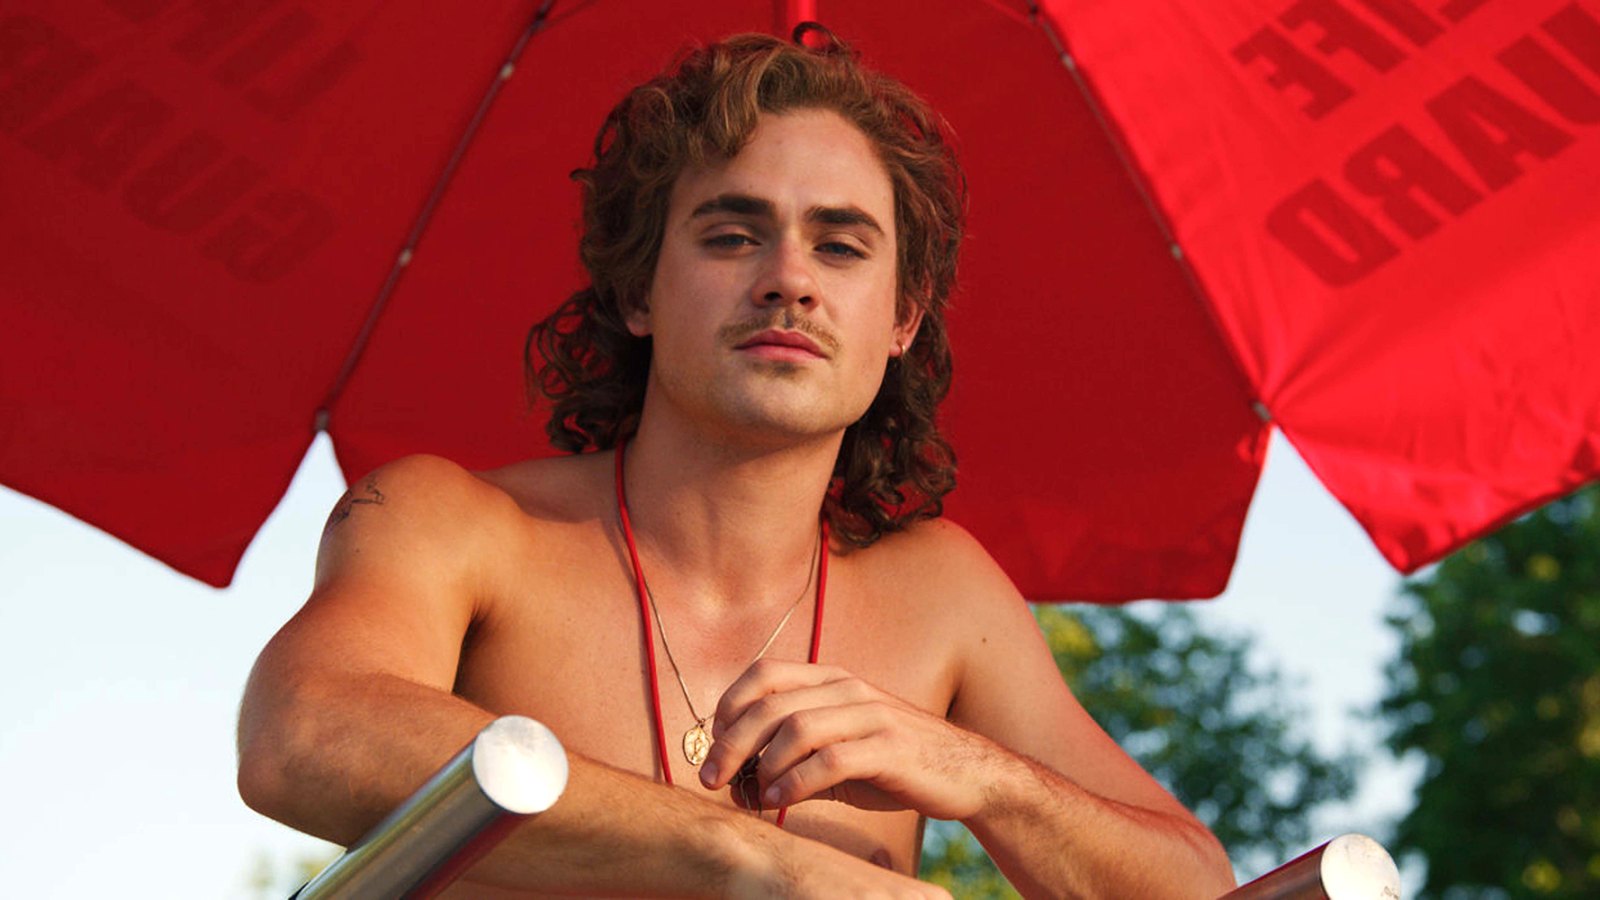 ‘Stranger Things’ Fan Gave $10K to Catfish Posing as Dacre Montgomery: We 'Just Really Hit it Off'